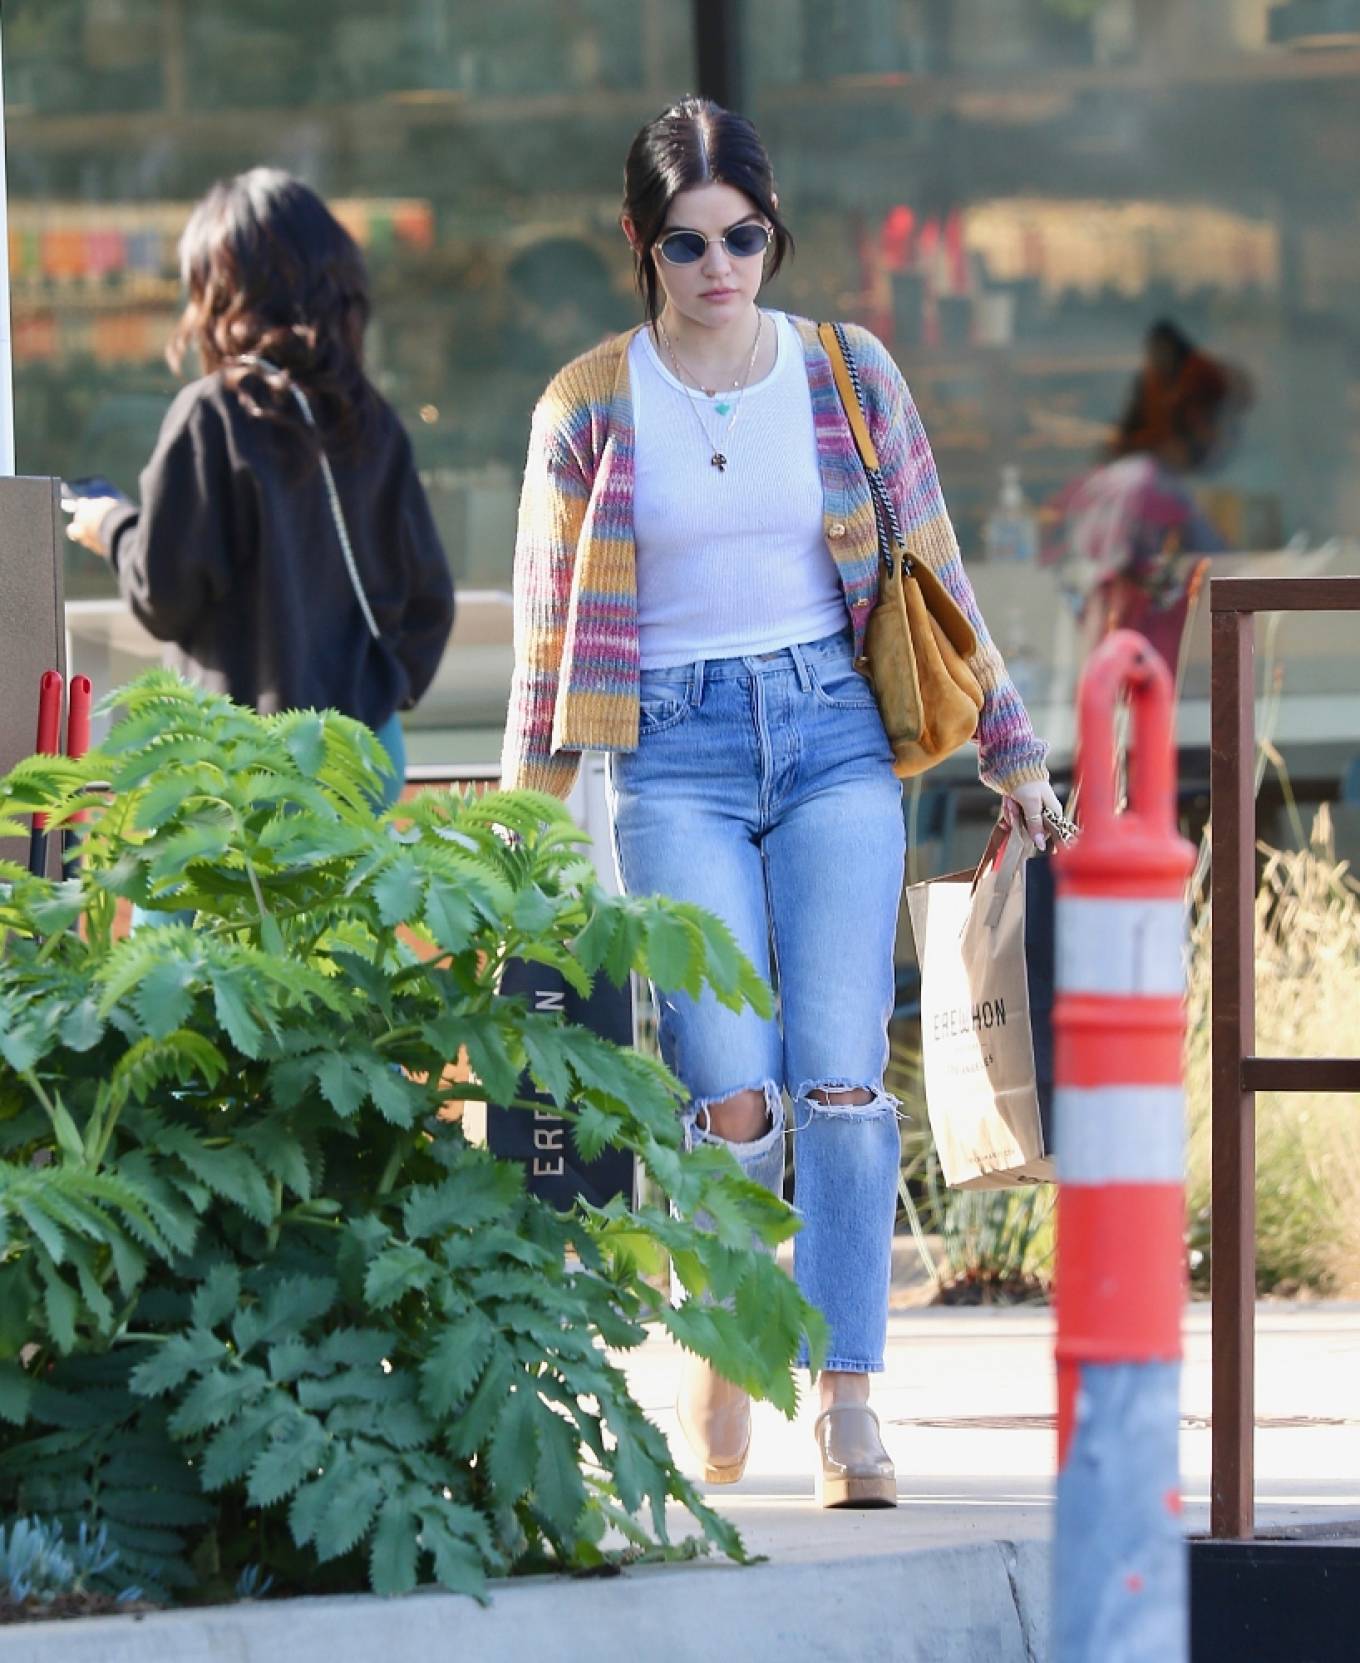 Lucy Hale 2021 : Lucy Hale – Shopping at Erewhon Market in Studio City-06